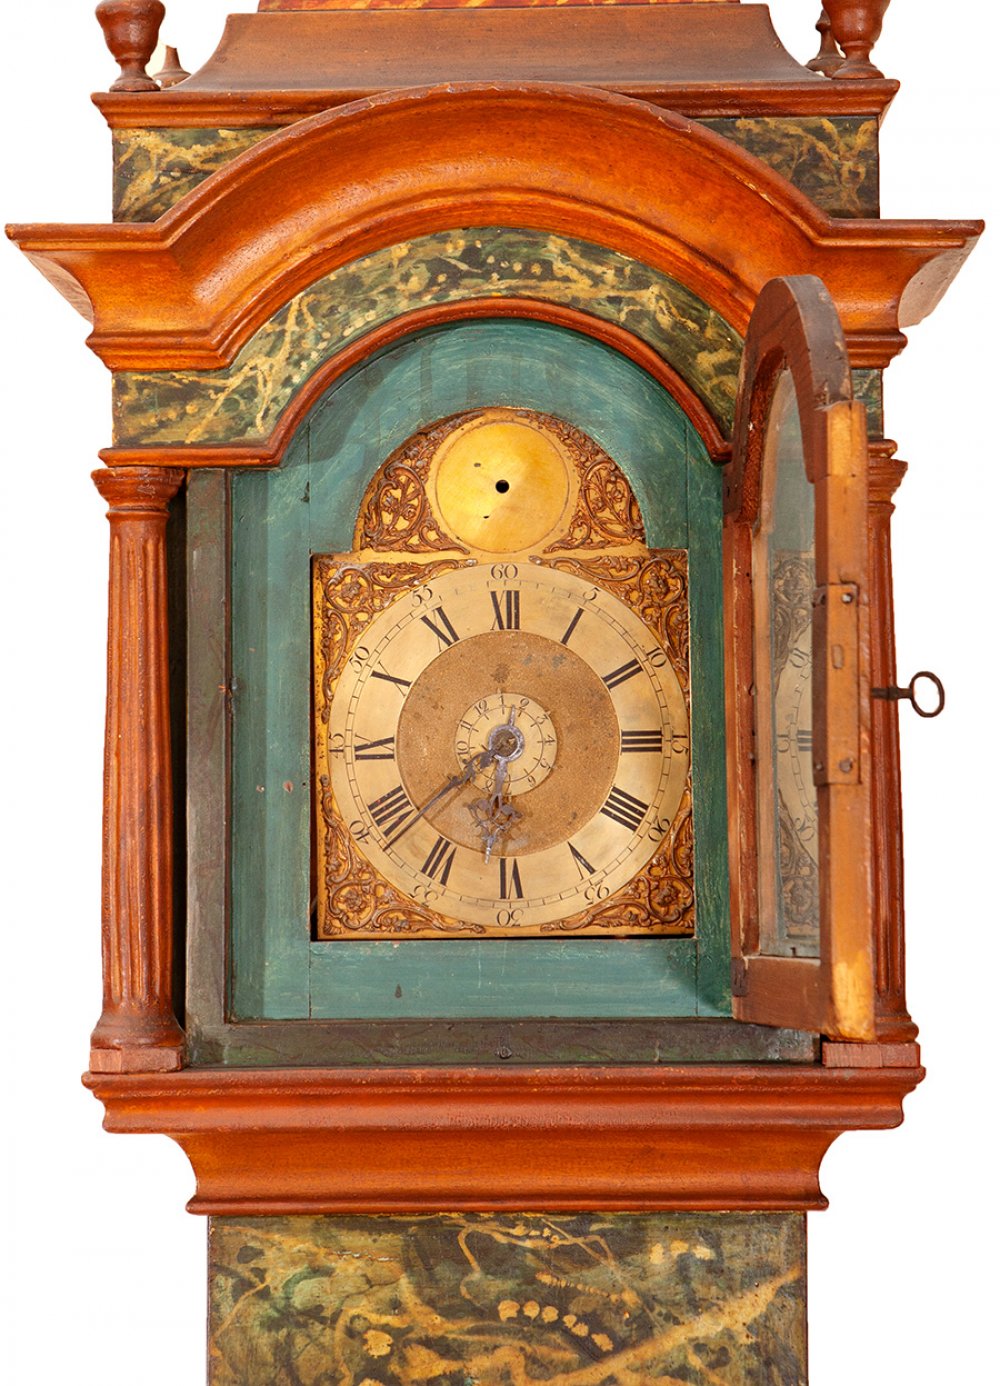 English style grandfather clock, 19th century.Polychrome wood.Requires restoration. On top of the - Image 3 of 7